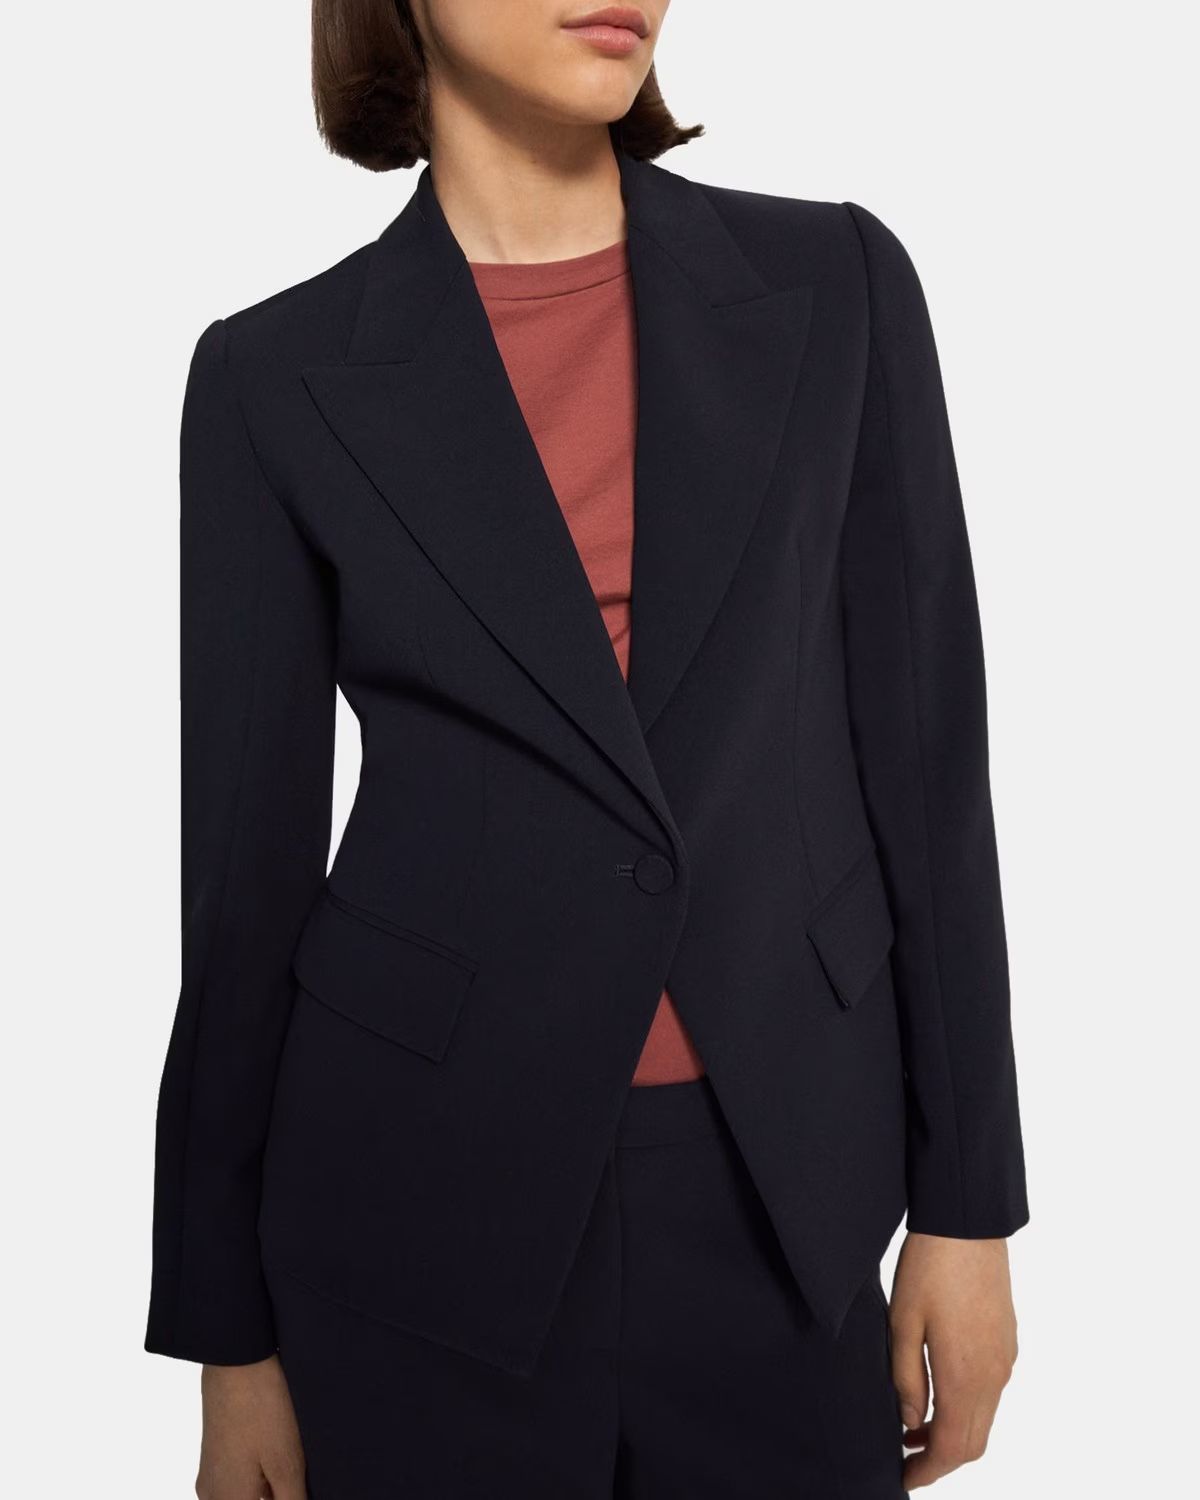 Angled Blazer in Crepe | Theory Outlet